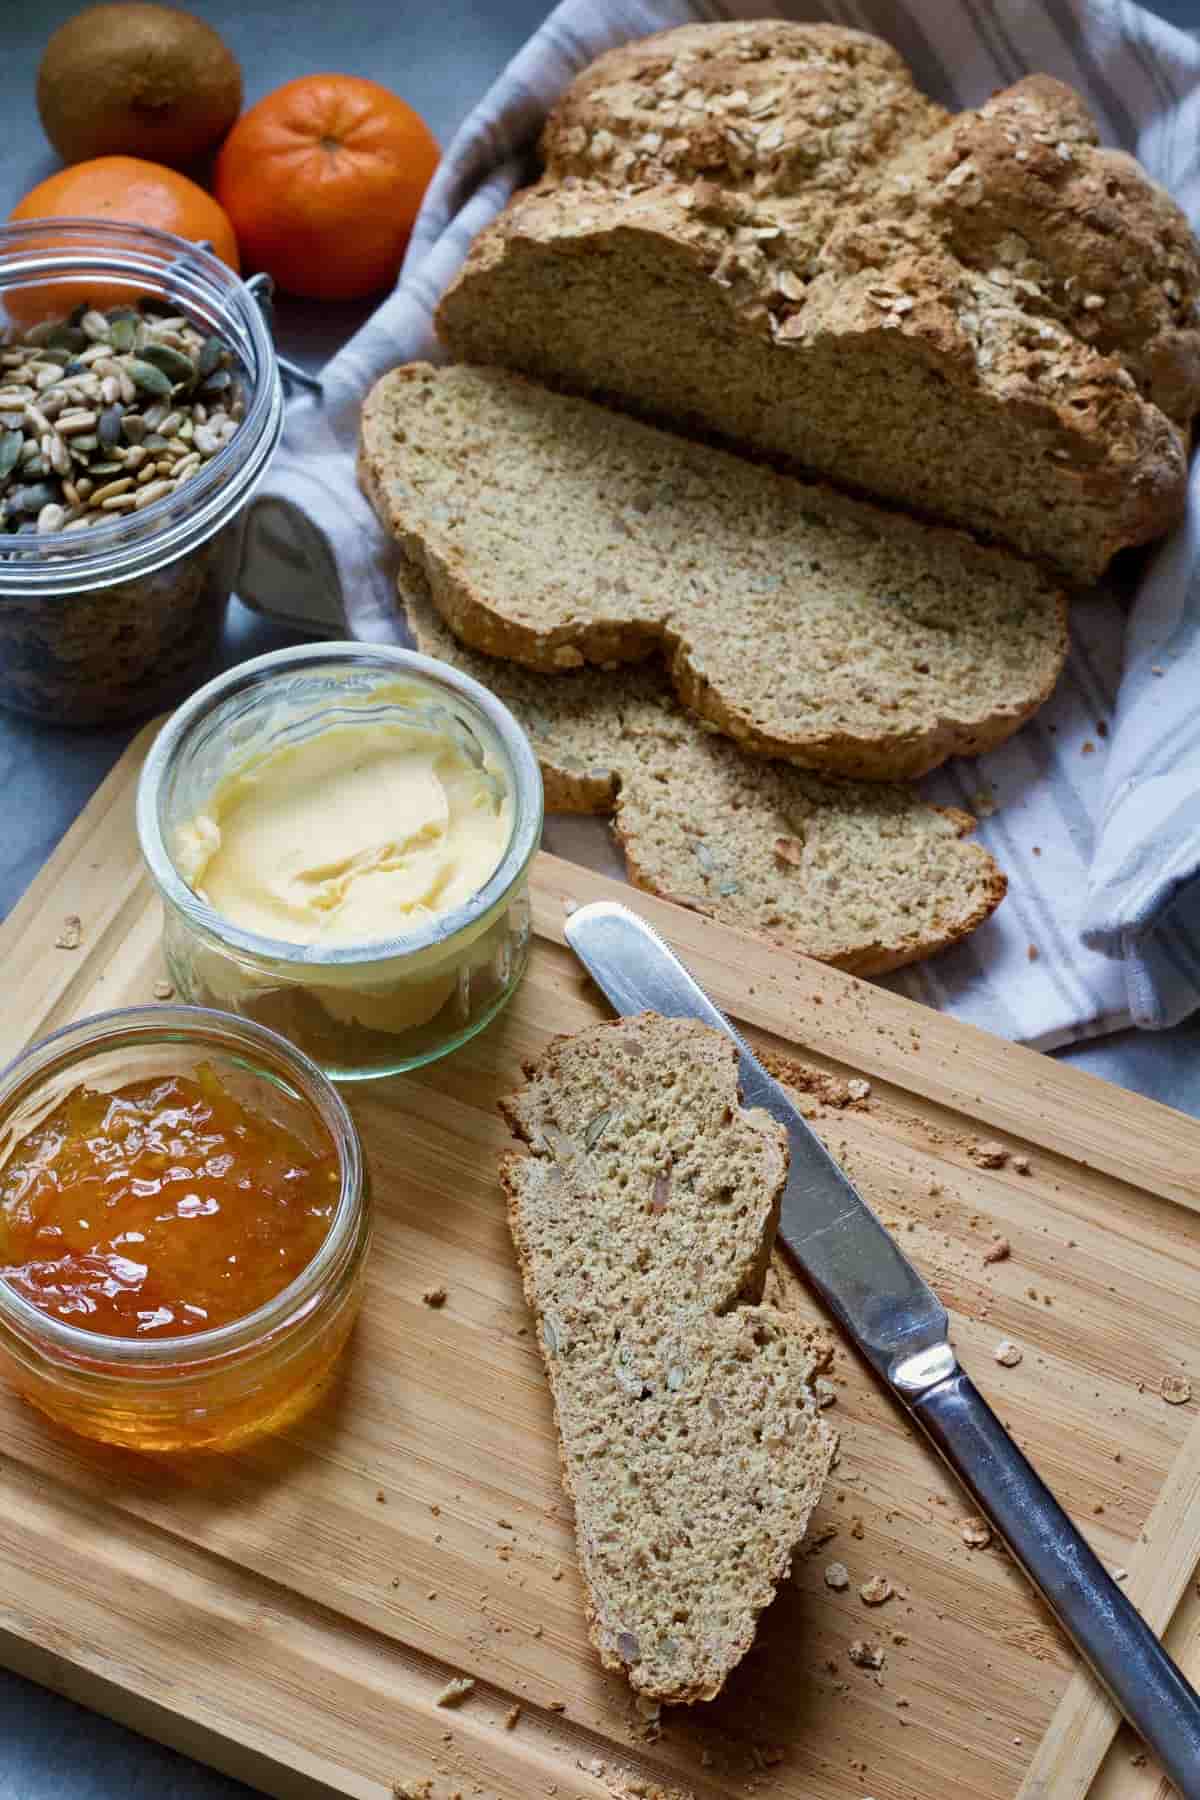 Slice of bread on a board, jar with butter & marmalade.